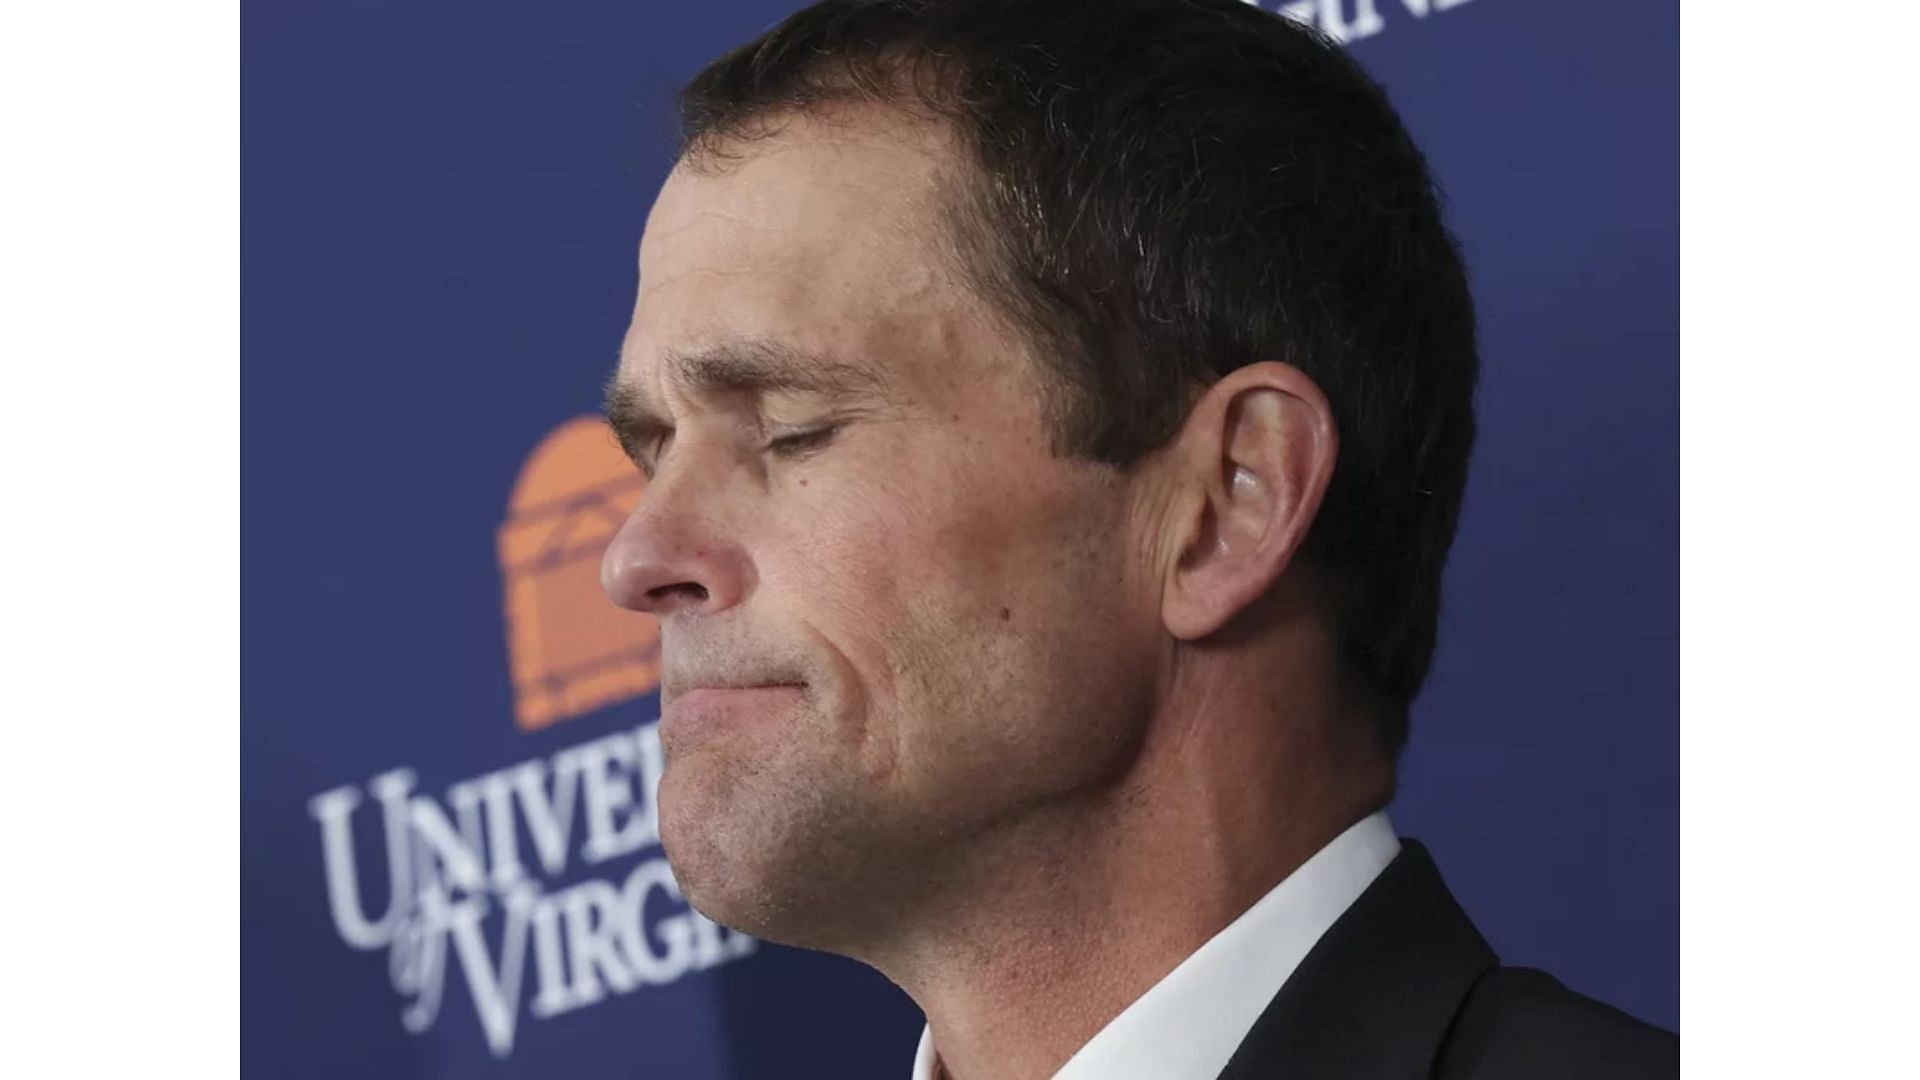 UVA president James Ryan gets emotional as he announces the victims&#039; names during a press conference (Image via Getty/Win McNamee)